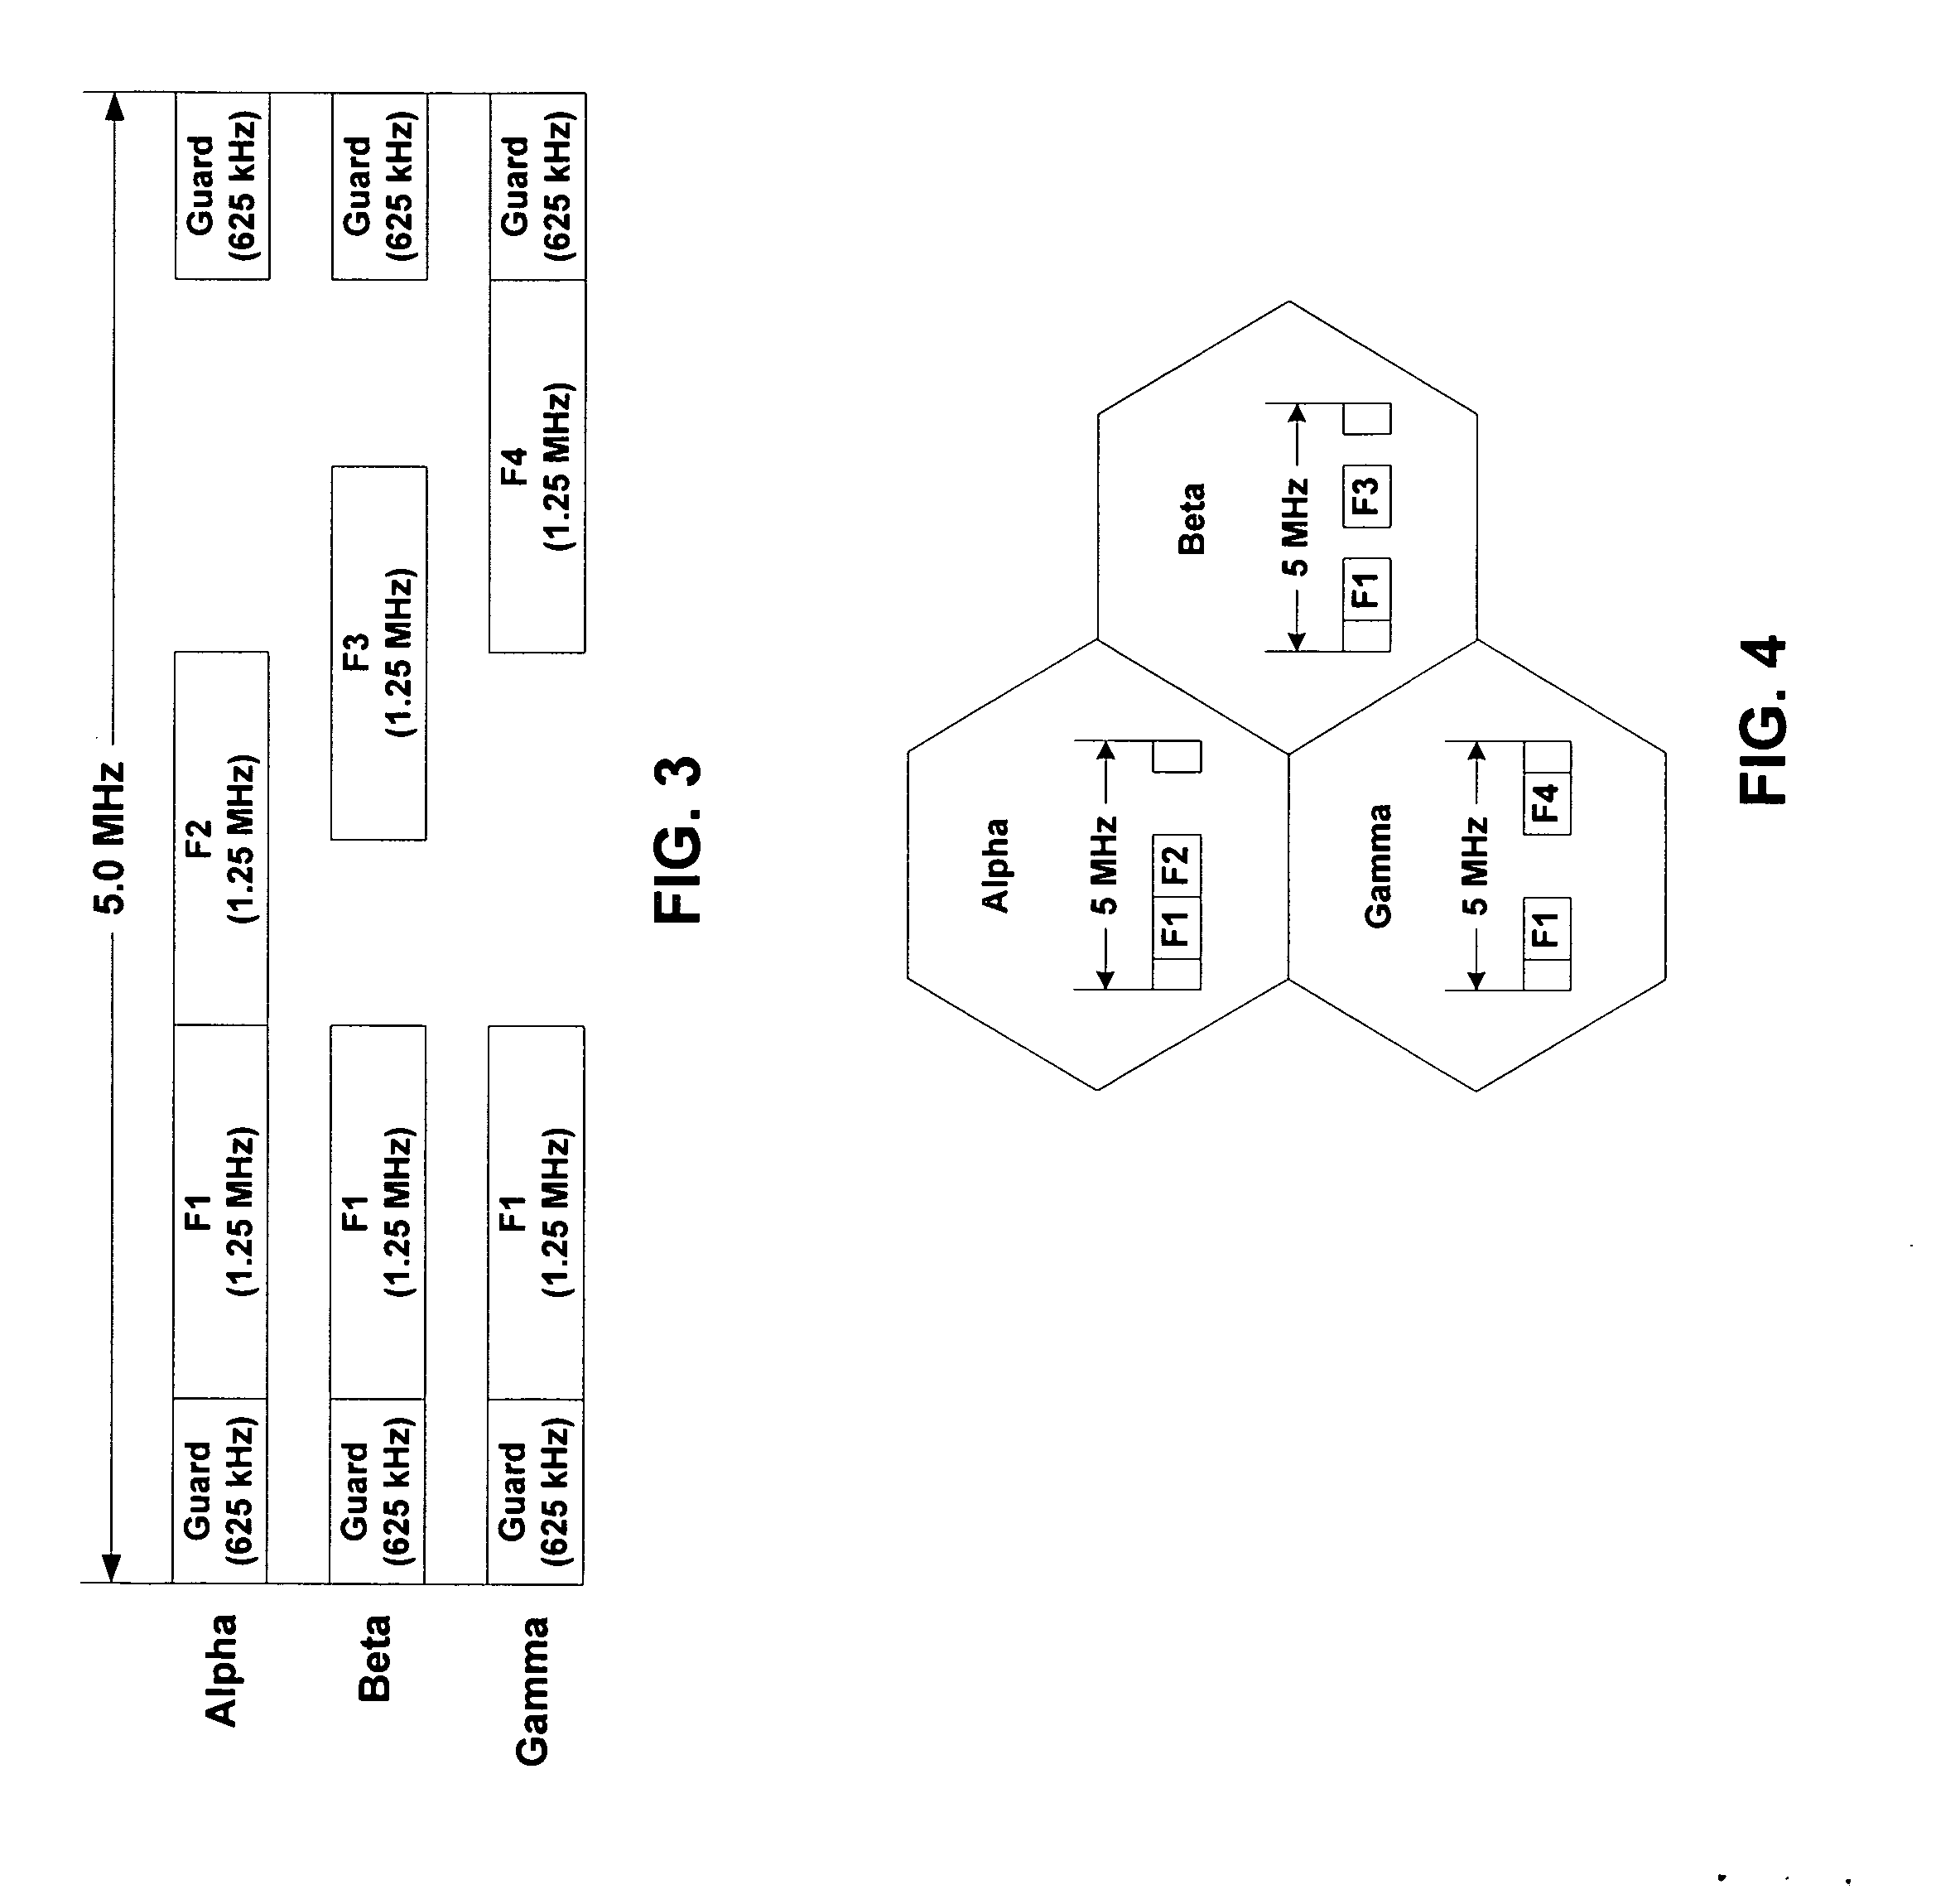 Method and system using overlapping frequency bands in a hybrid frequency reuse plan